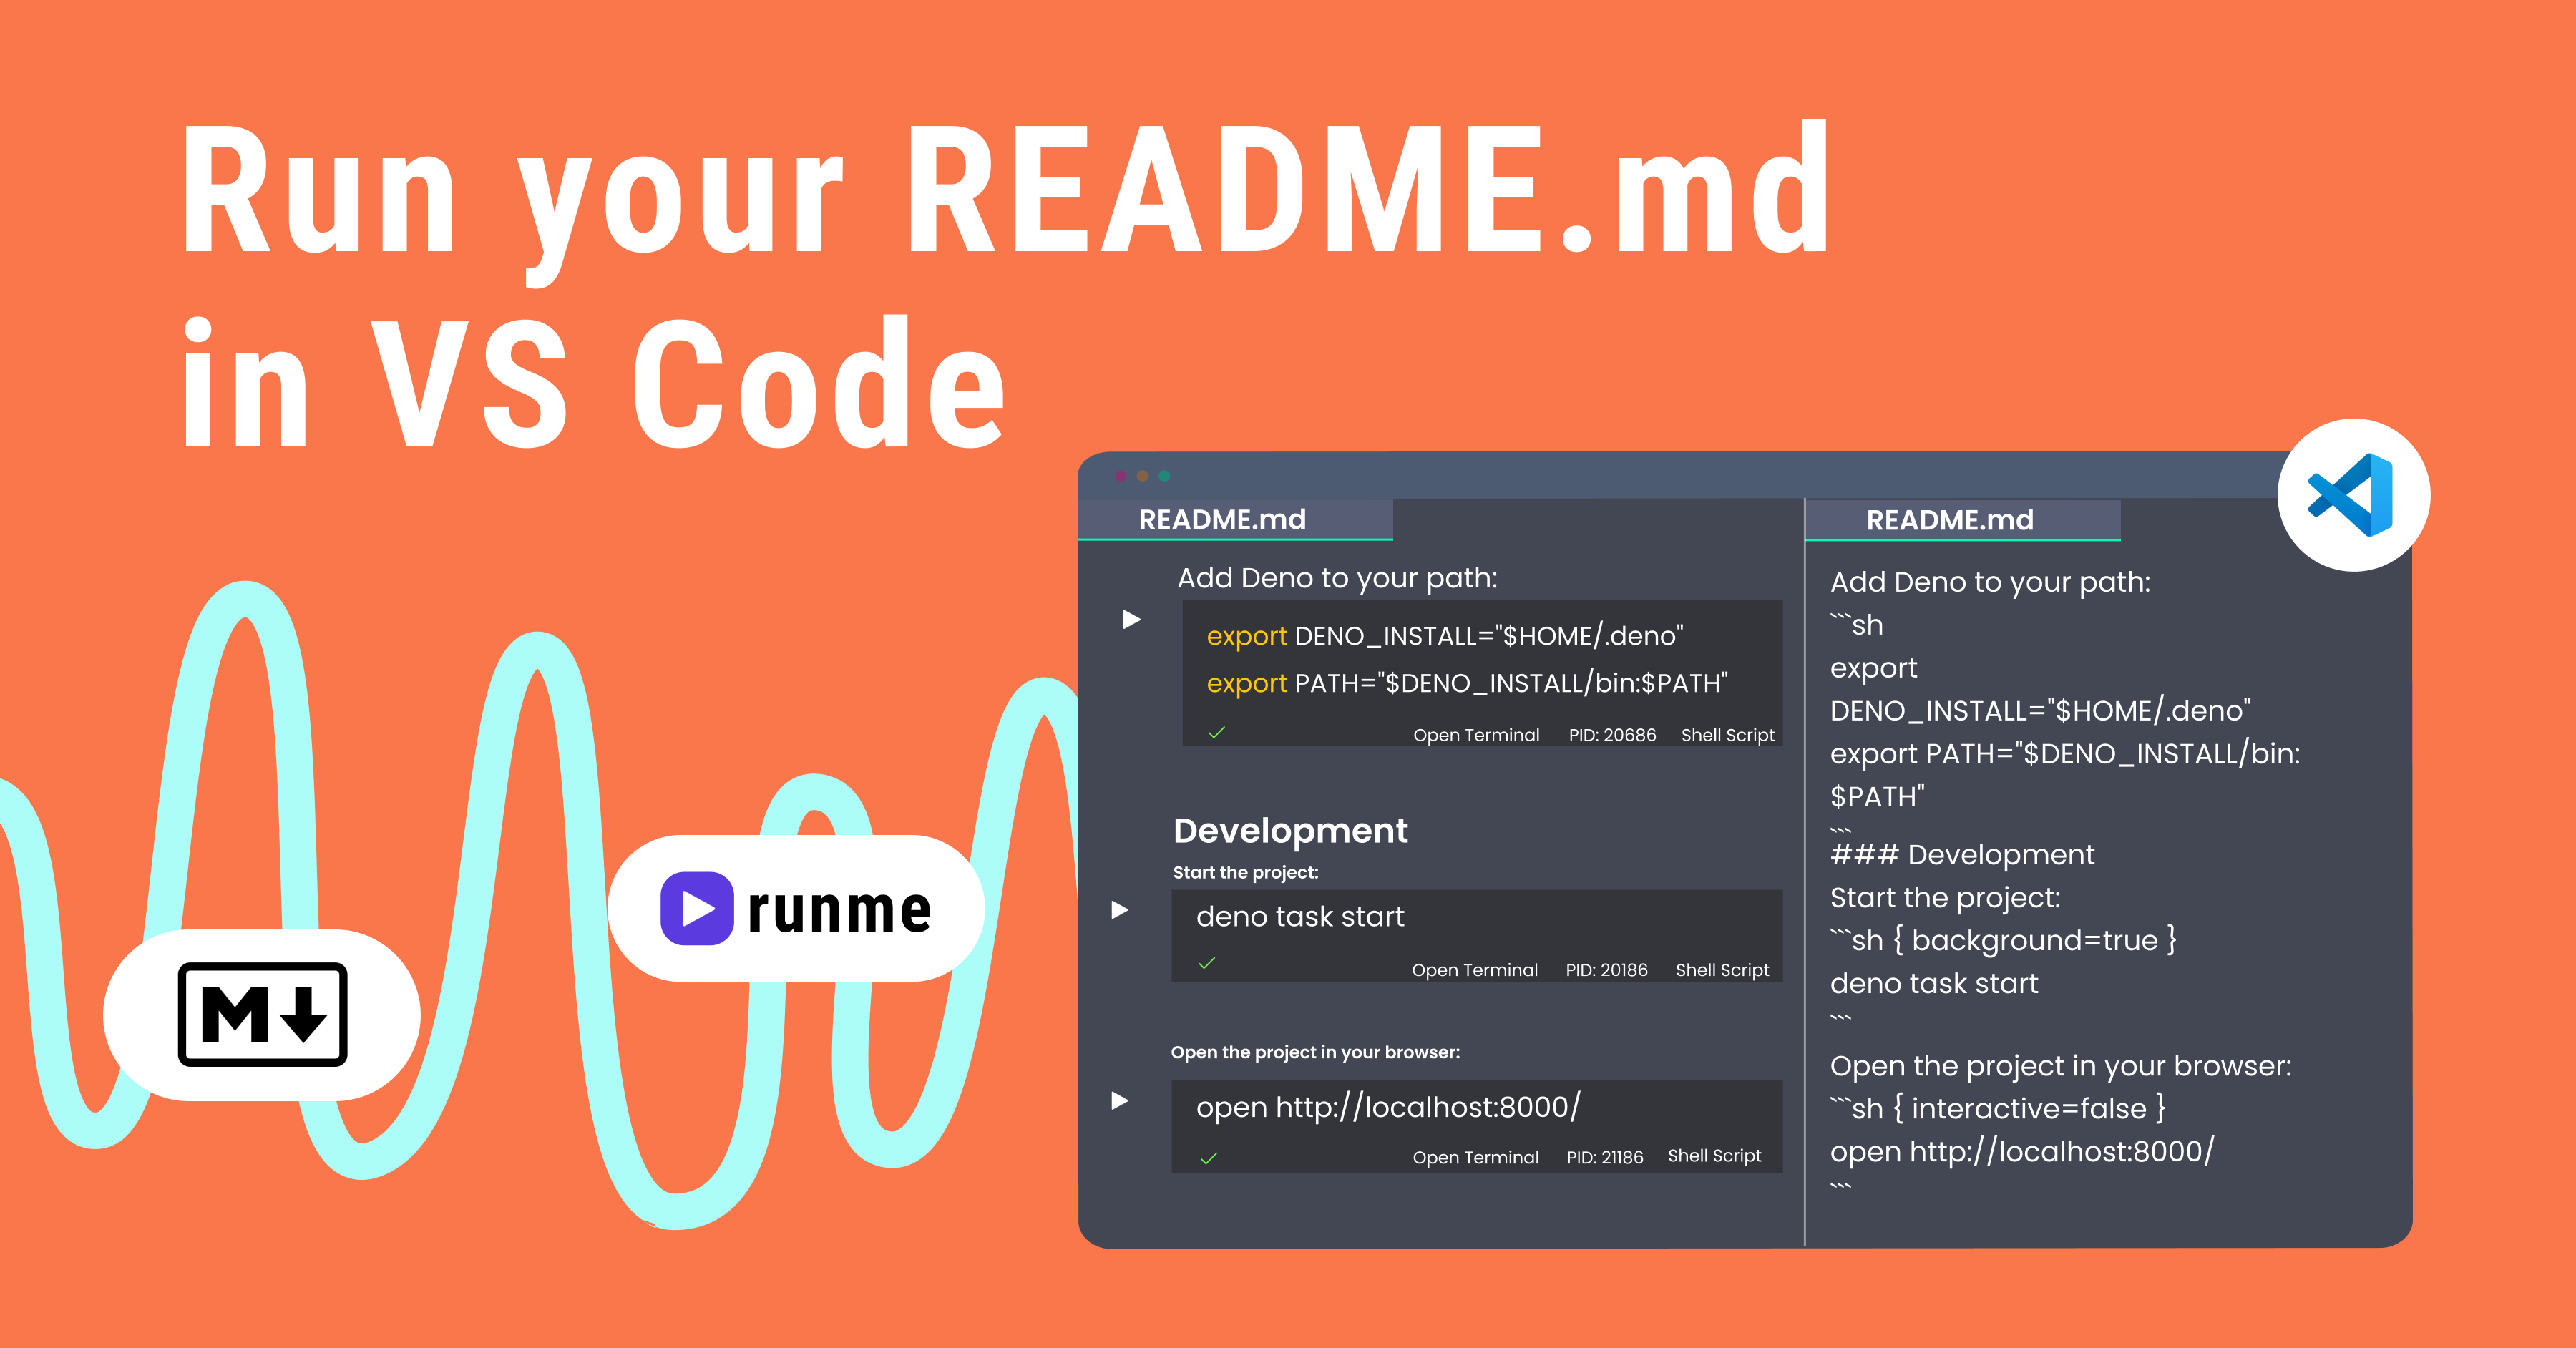 Run your README.md in VS Code